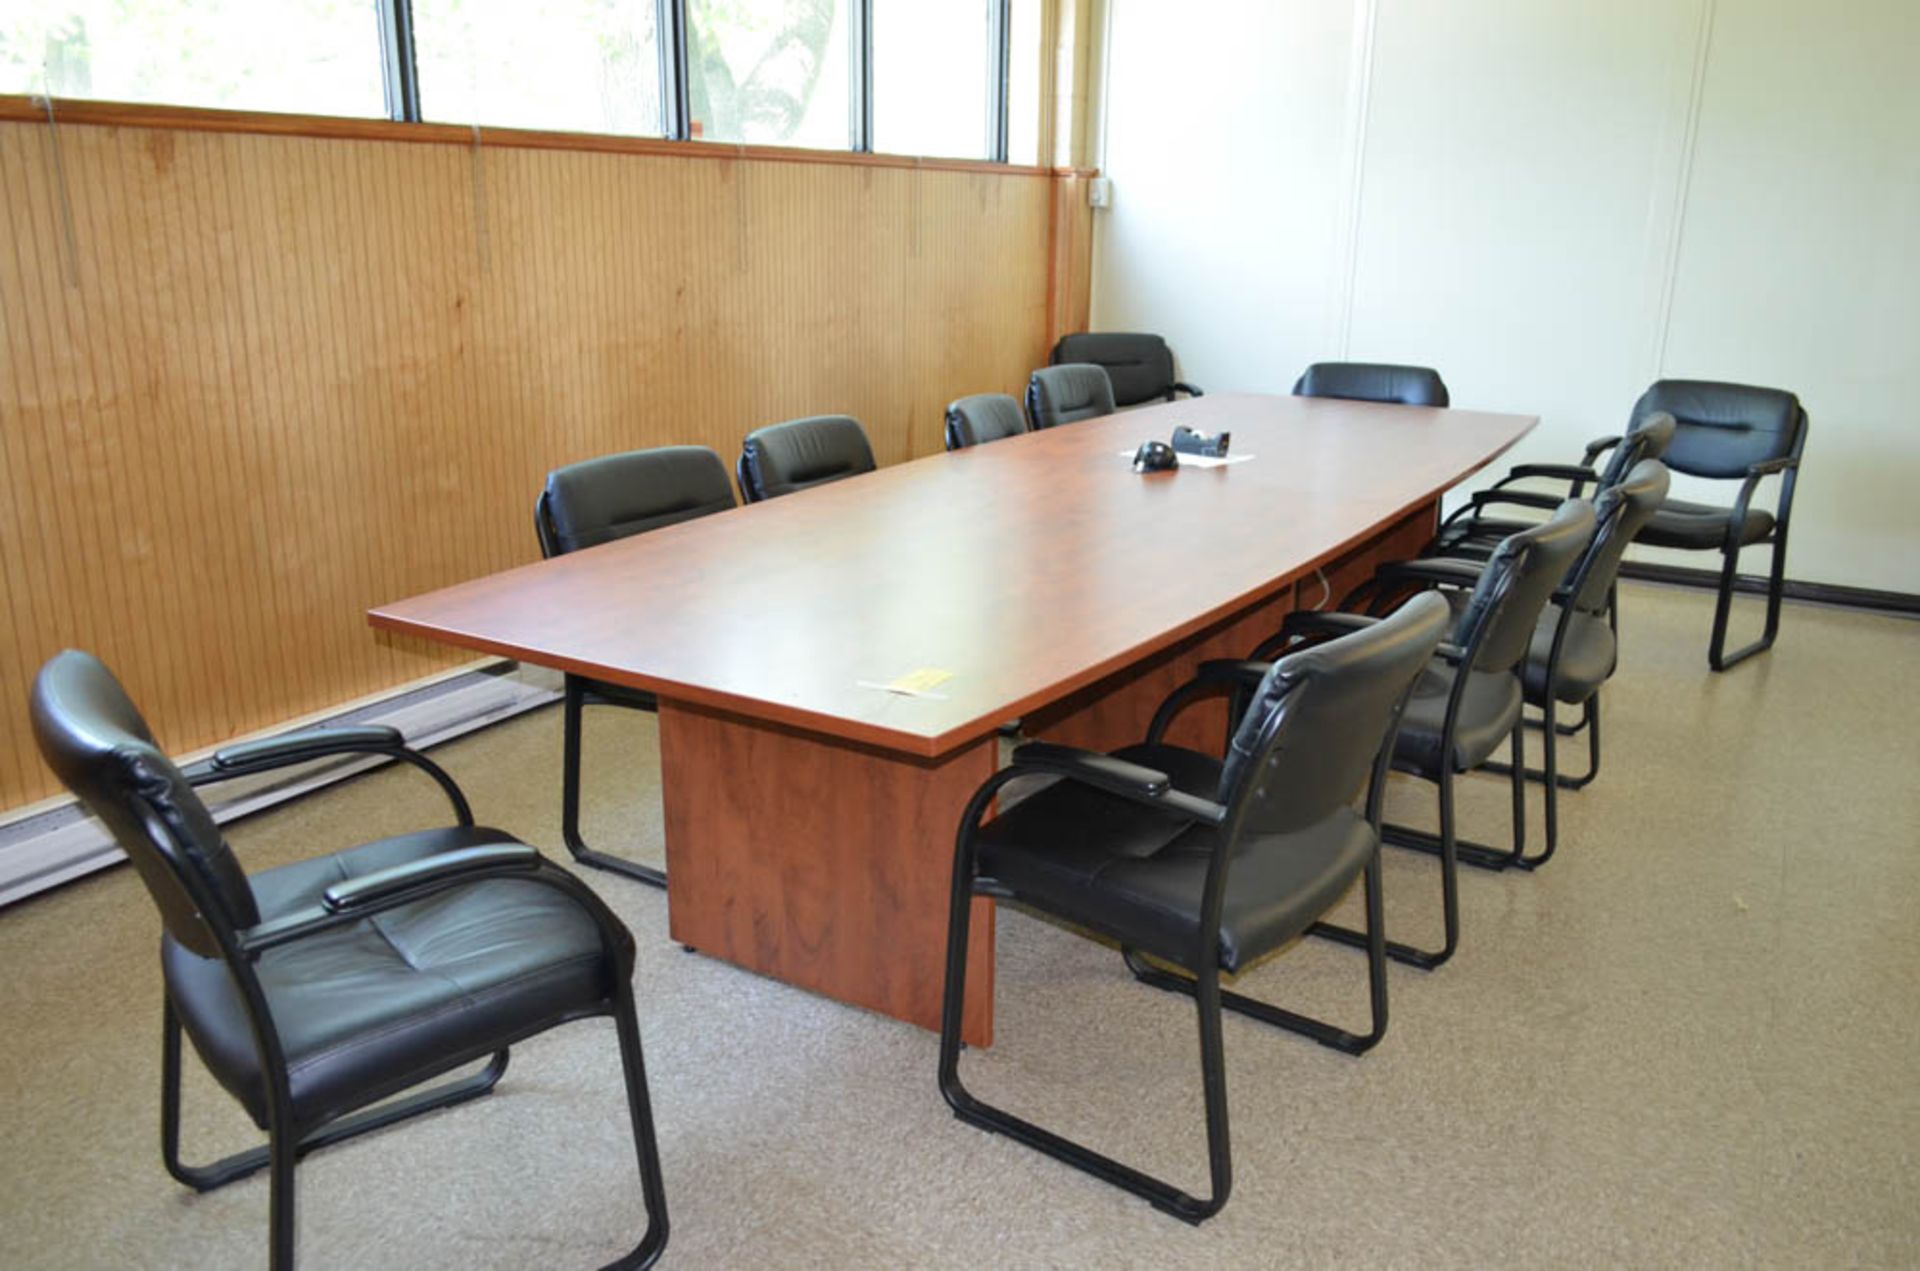 12' CONFERENCE TABLE WITH [12] CHAIRS